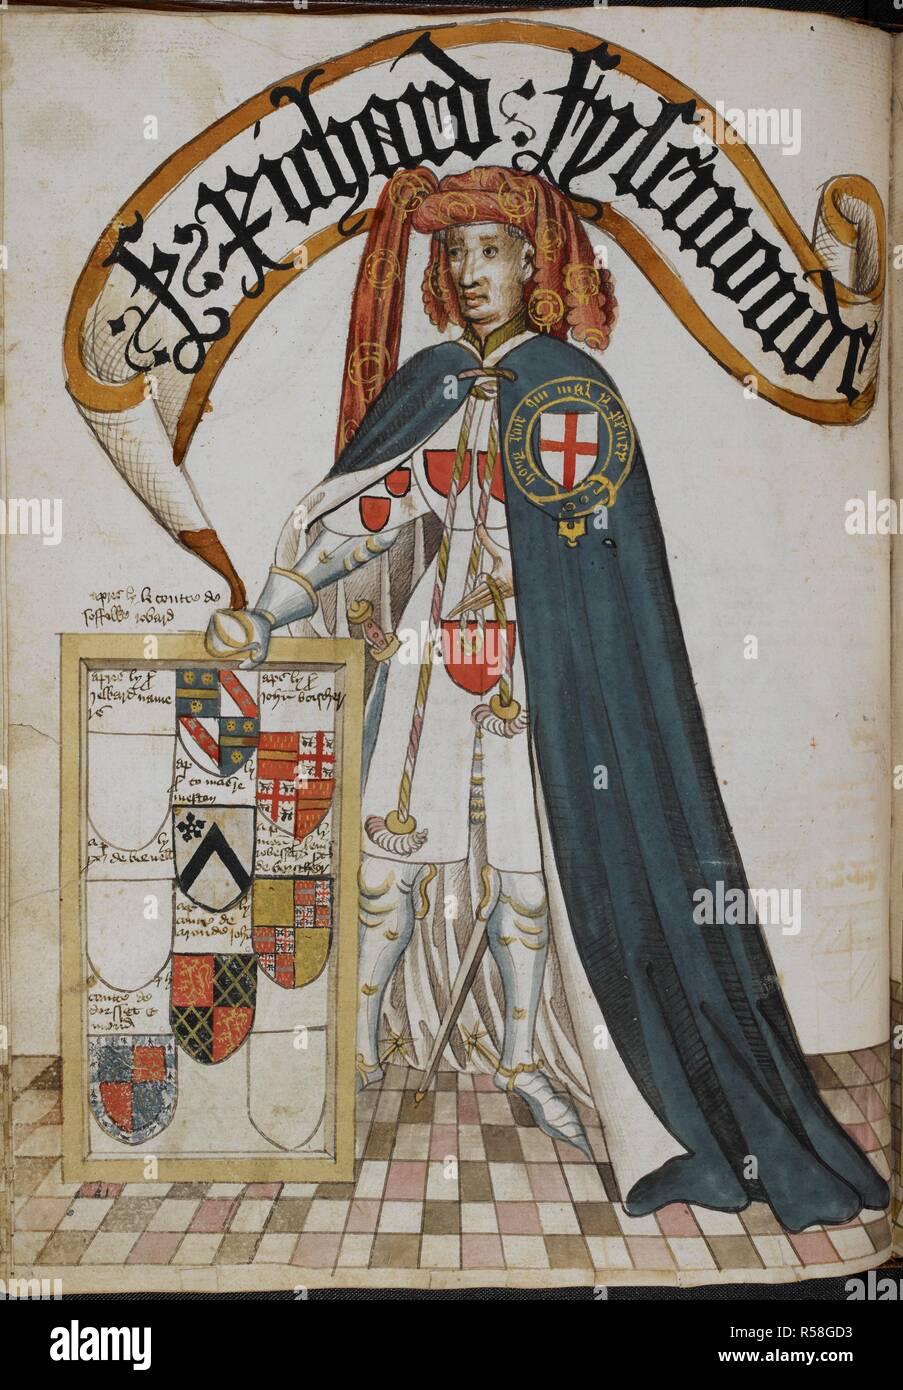 Sir Richard FitzSimon, of the Order of the Garter, wearing a blue ...